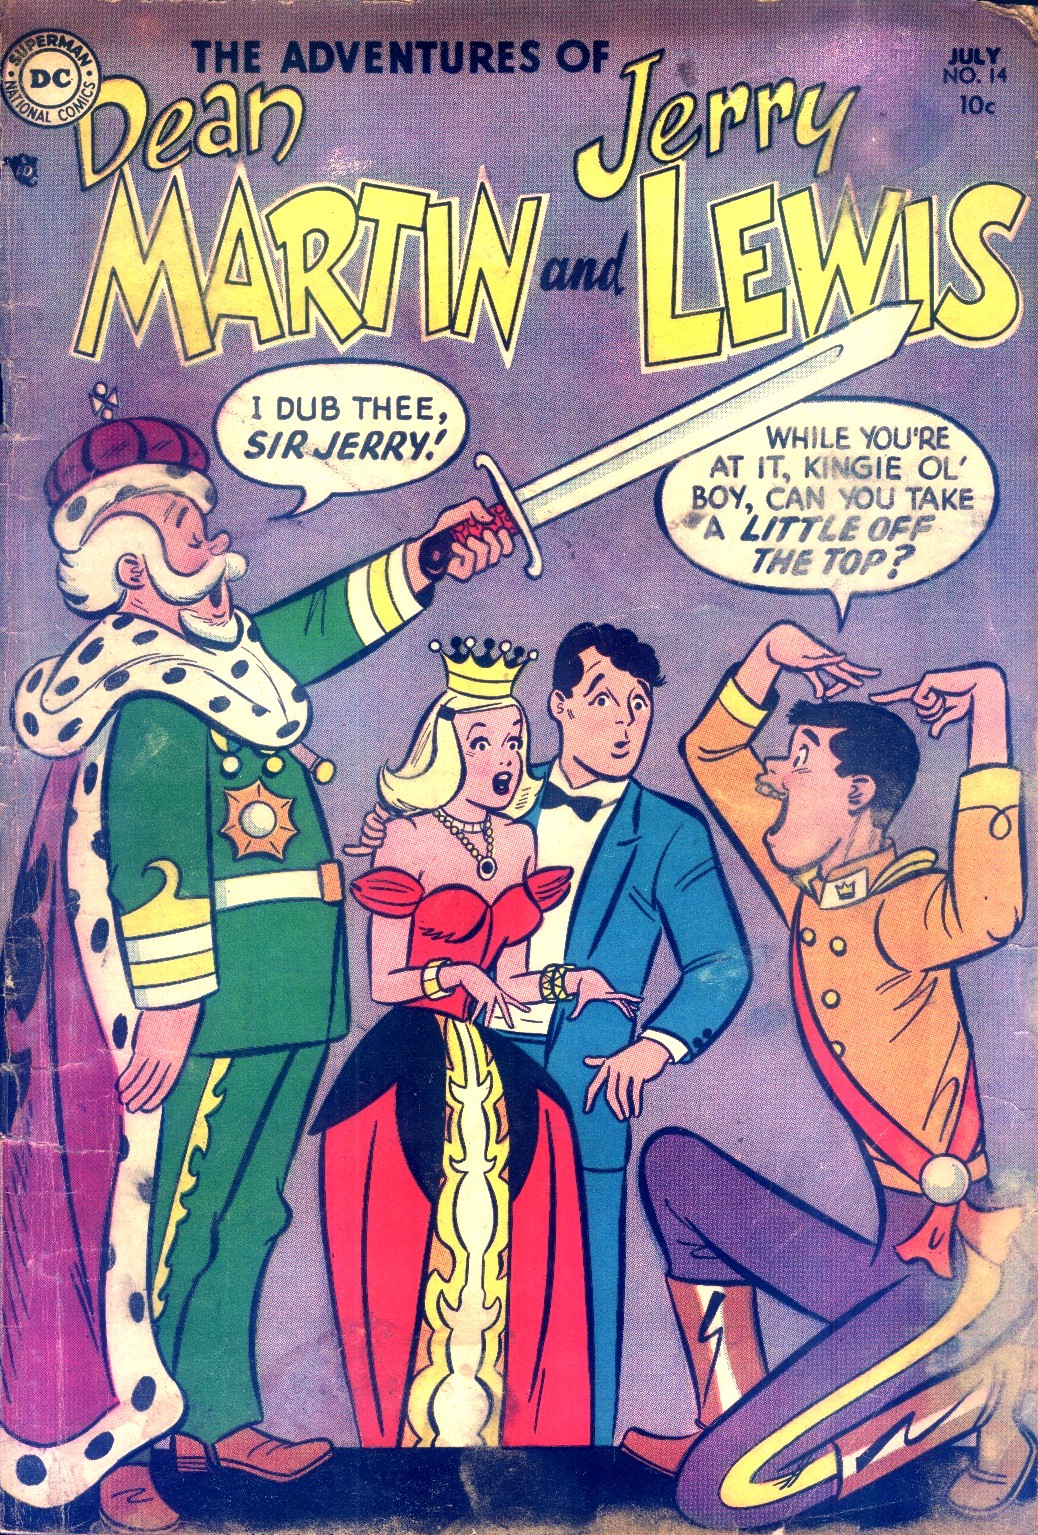 Read online The Adventures of Dean Martin and Jerry Lewis comic -  Issue #14 - 1